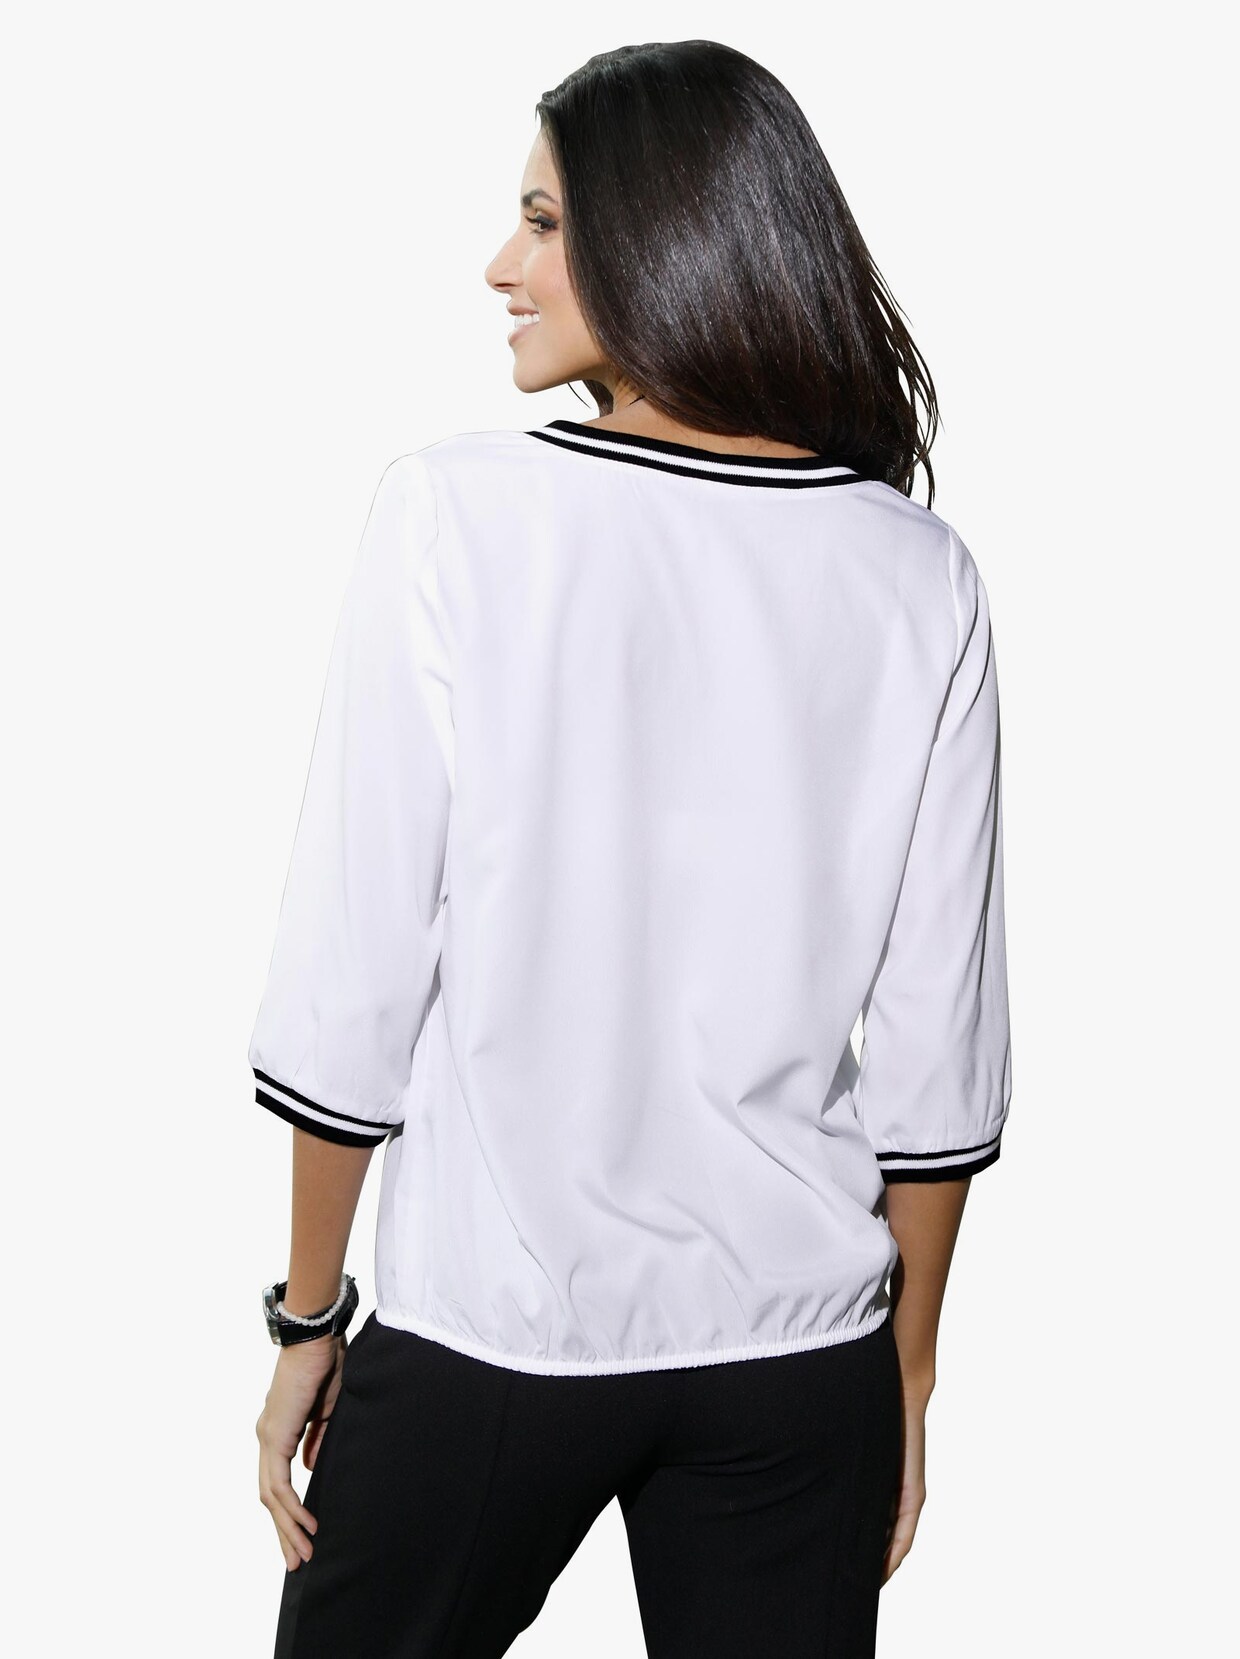 Comfortabele blouse - wit geprint